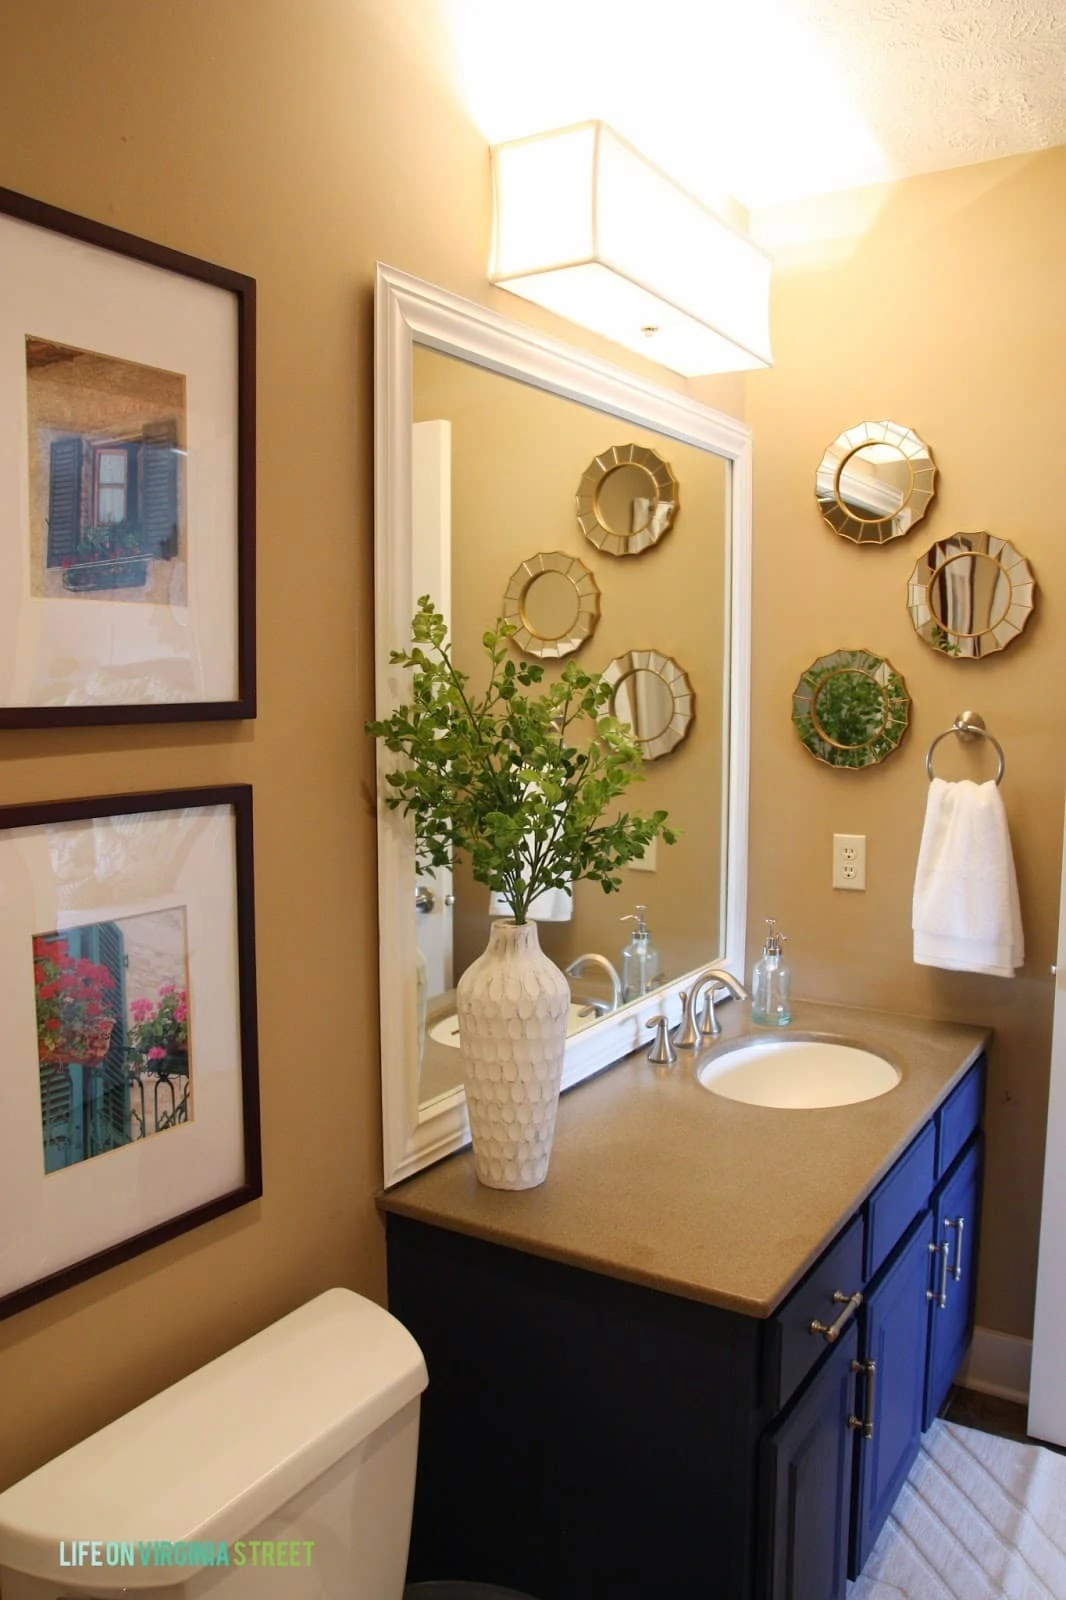 In addition to making over the vanity, I also added a lot more interesting pieces and accessories to the space like these small round mirrors with gold trim and this white vase.